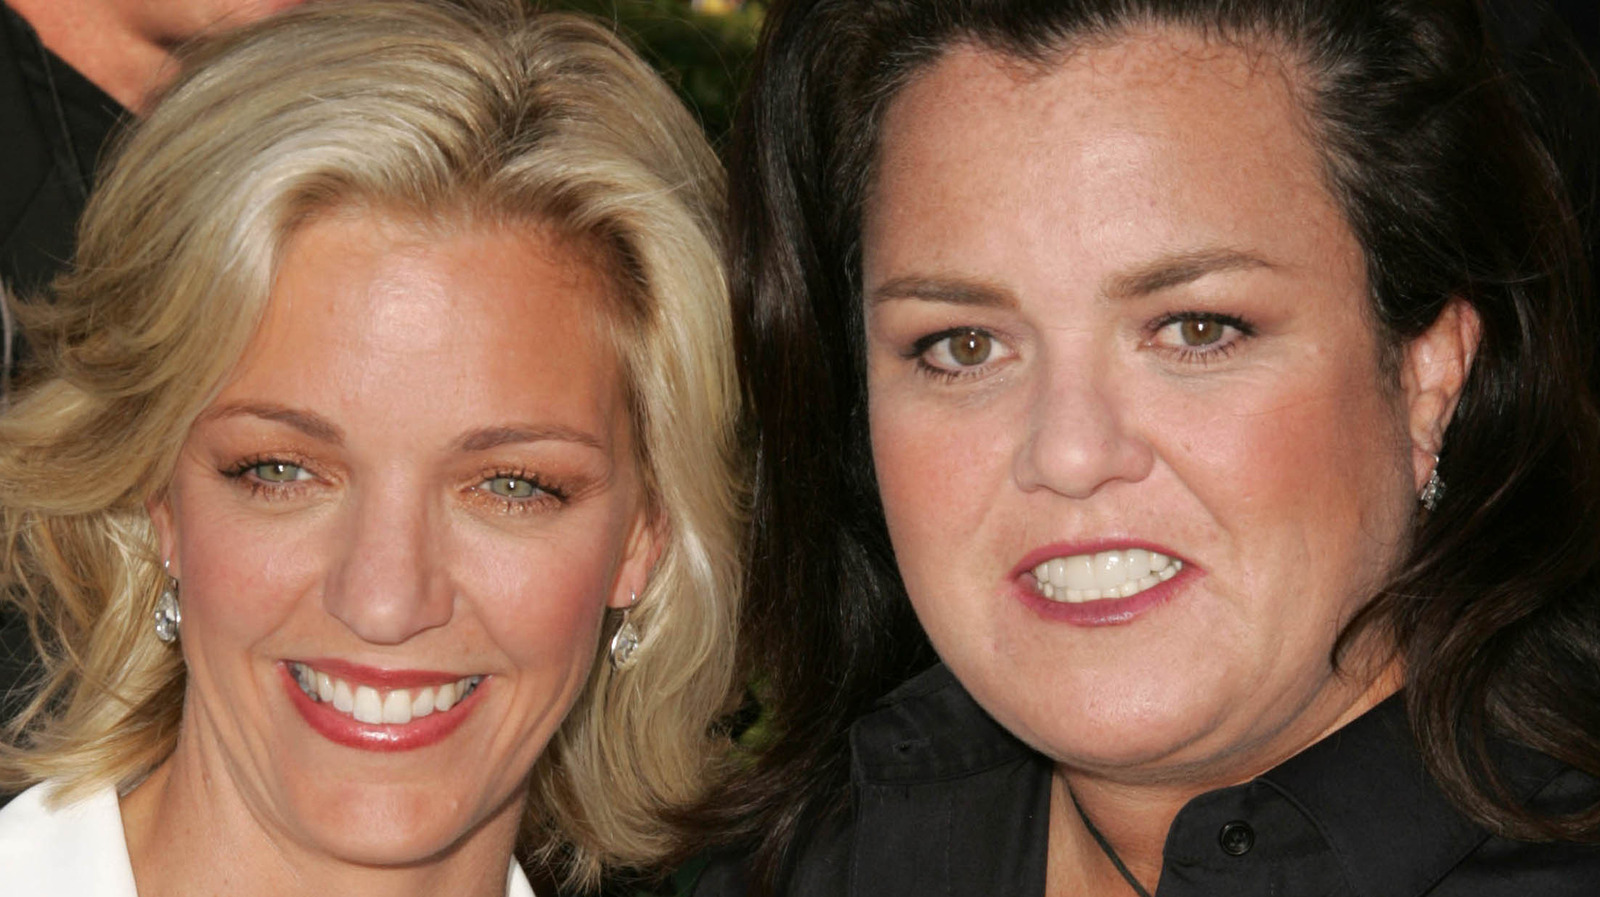 What Happened To Rosie ODonnells First Wife, Kelli Carpenter? image